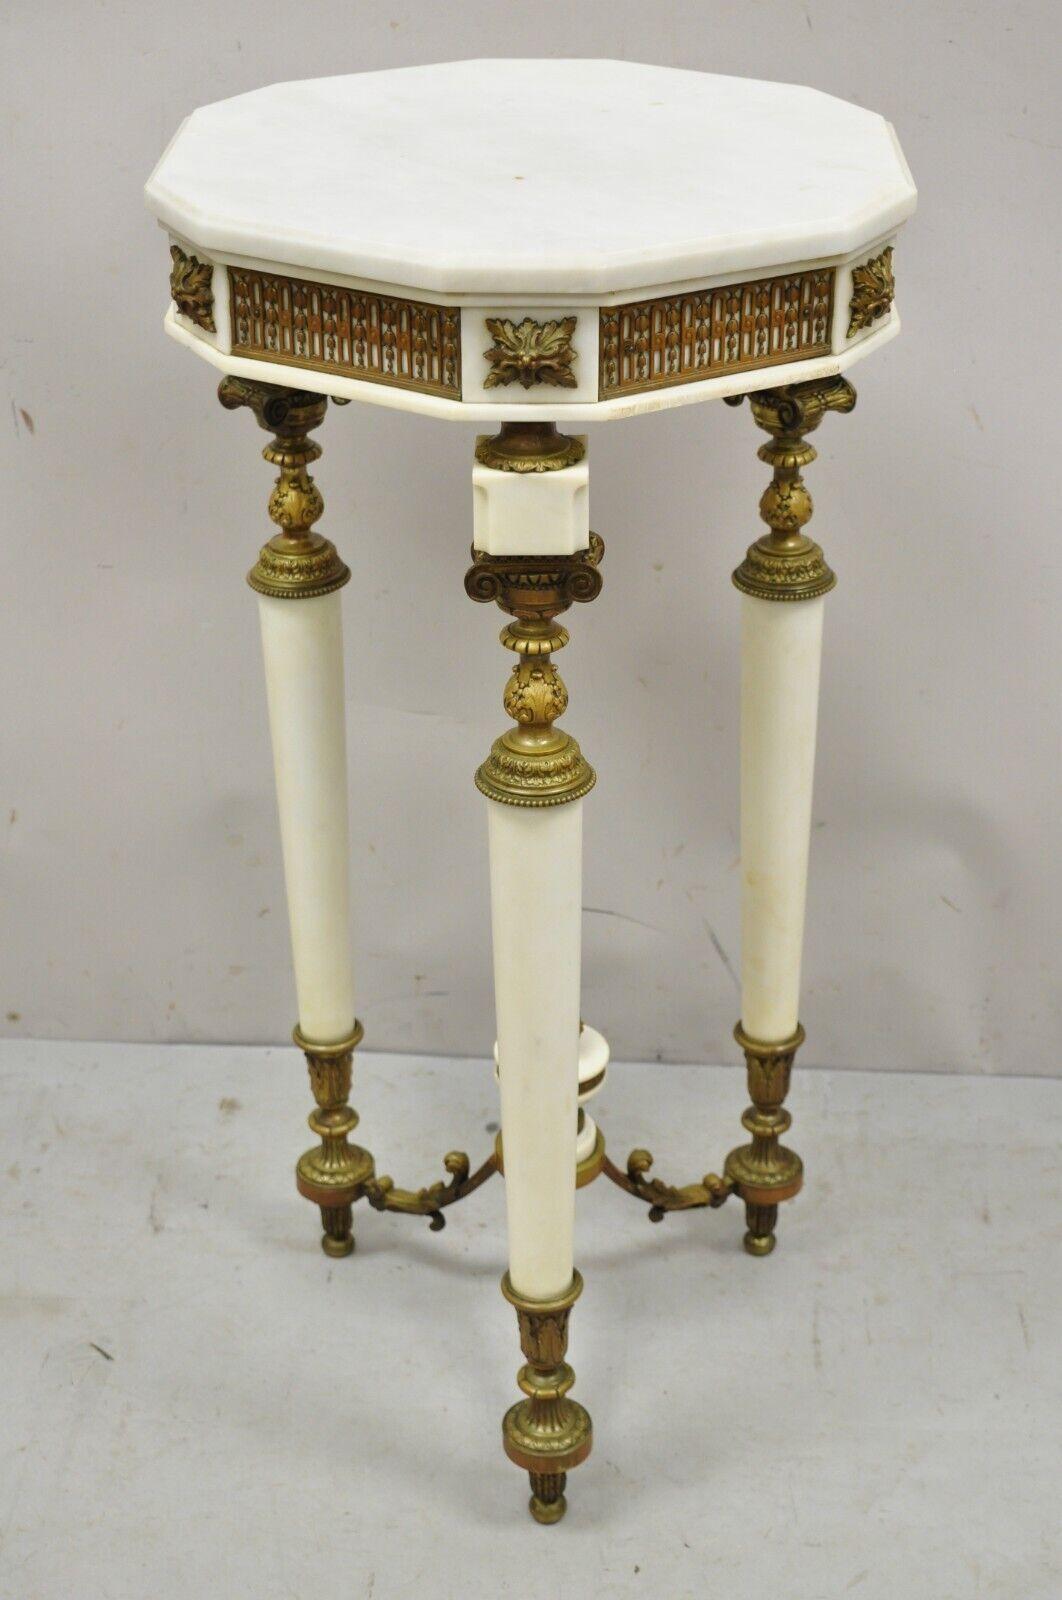 Antique French Louis XV Style Bronze and Marble Parlor Accent side table. Item features marble column form legs, remarkable bronze detailed ormolu, very nice antique item, great style and form. Circa 19th Century. Measurements: 33.5